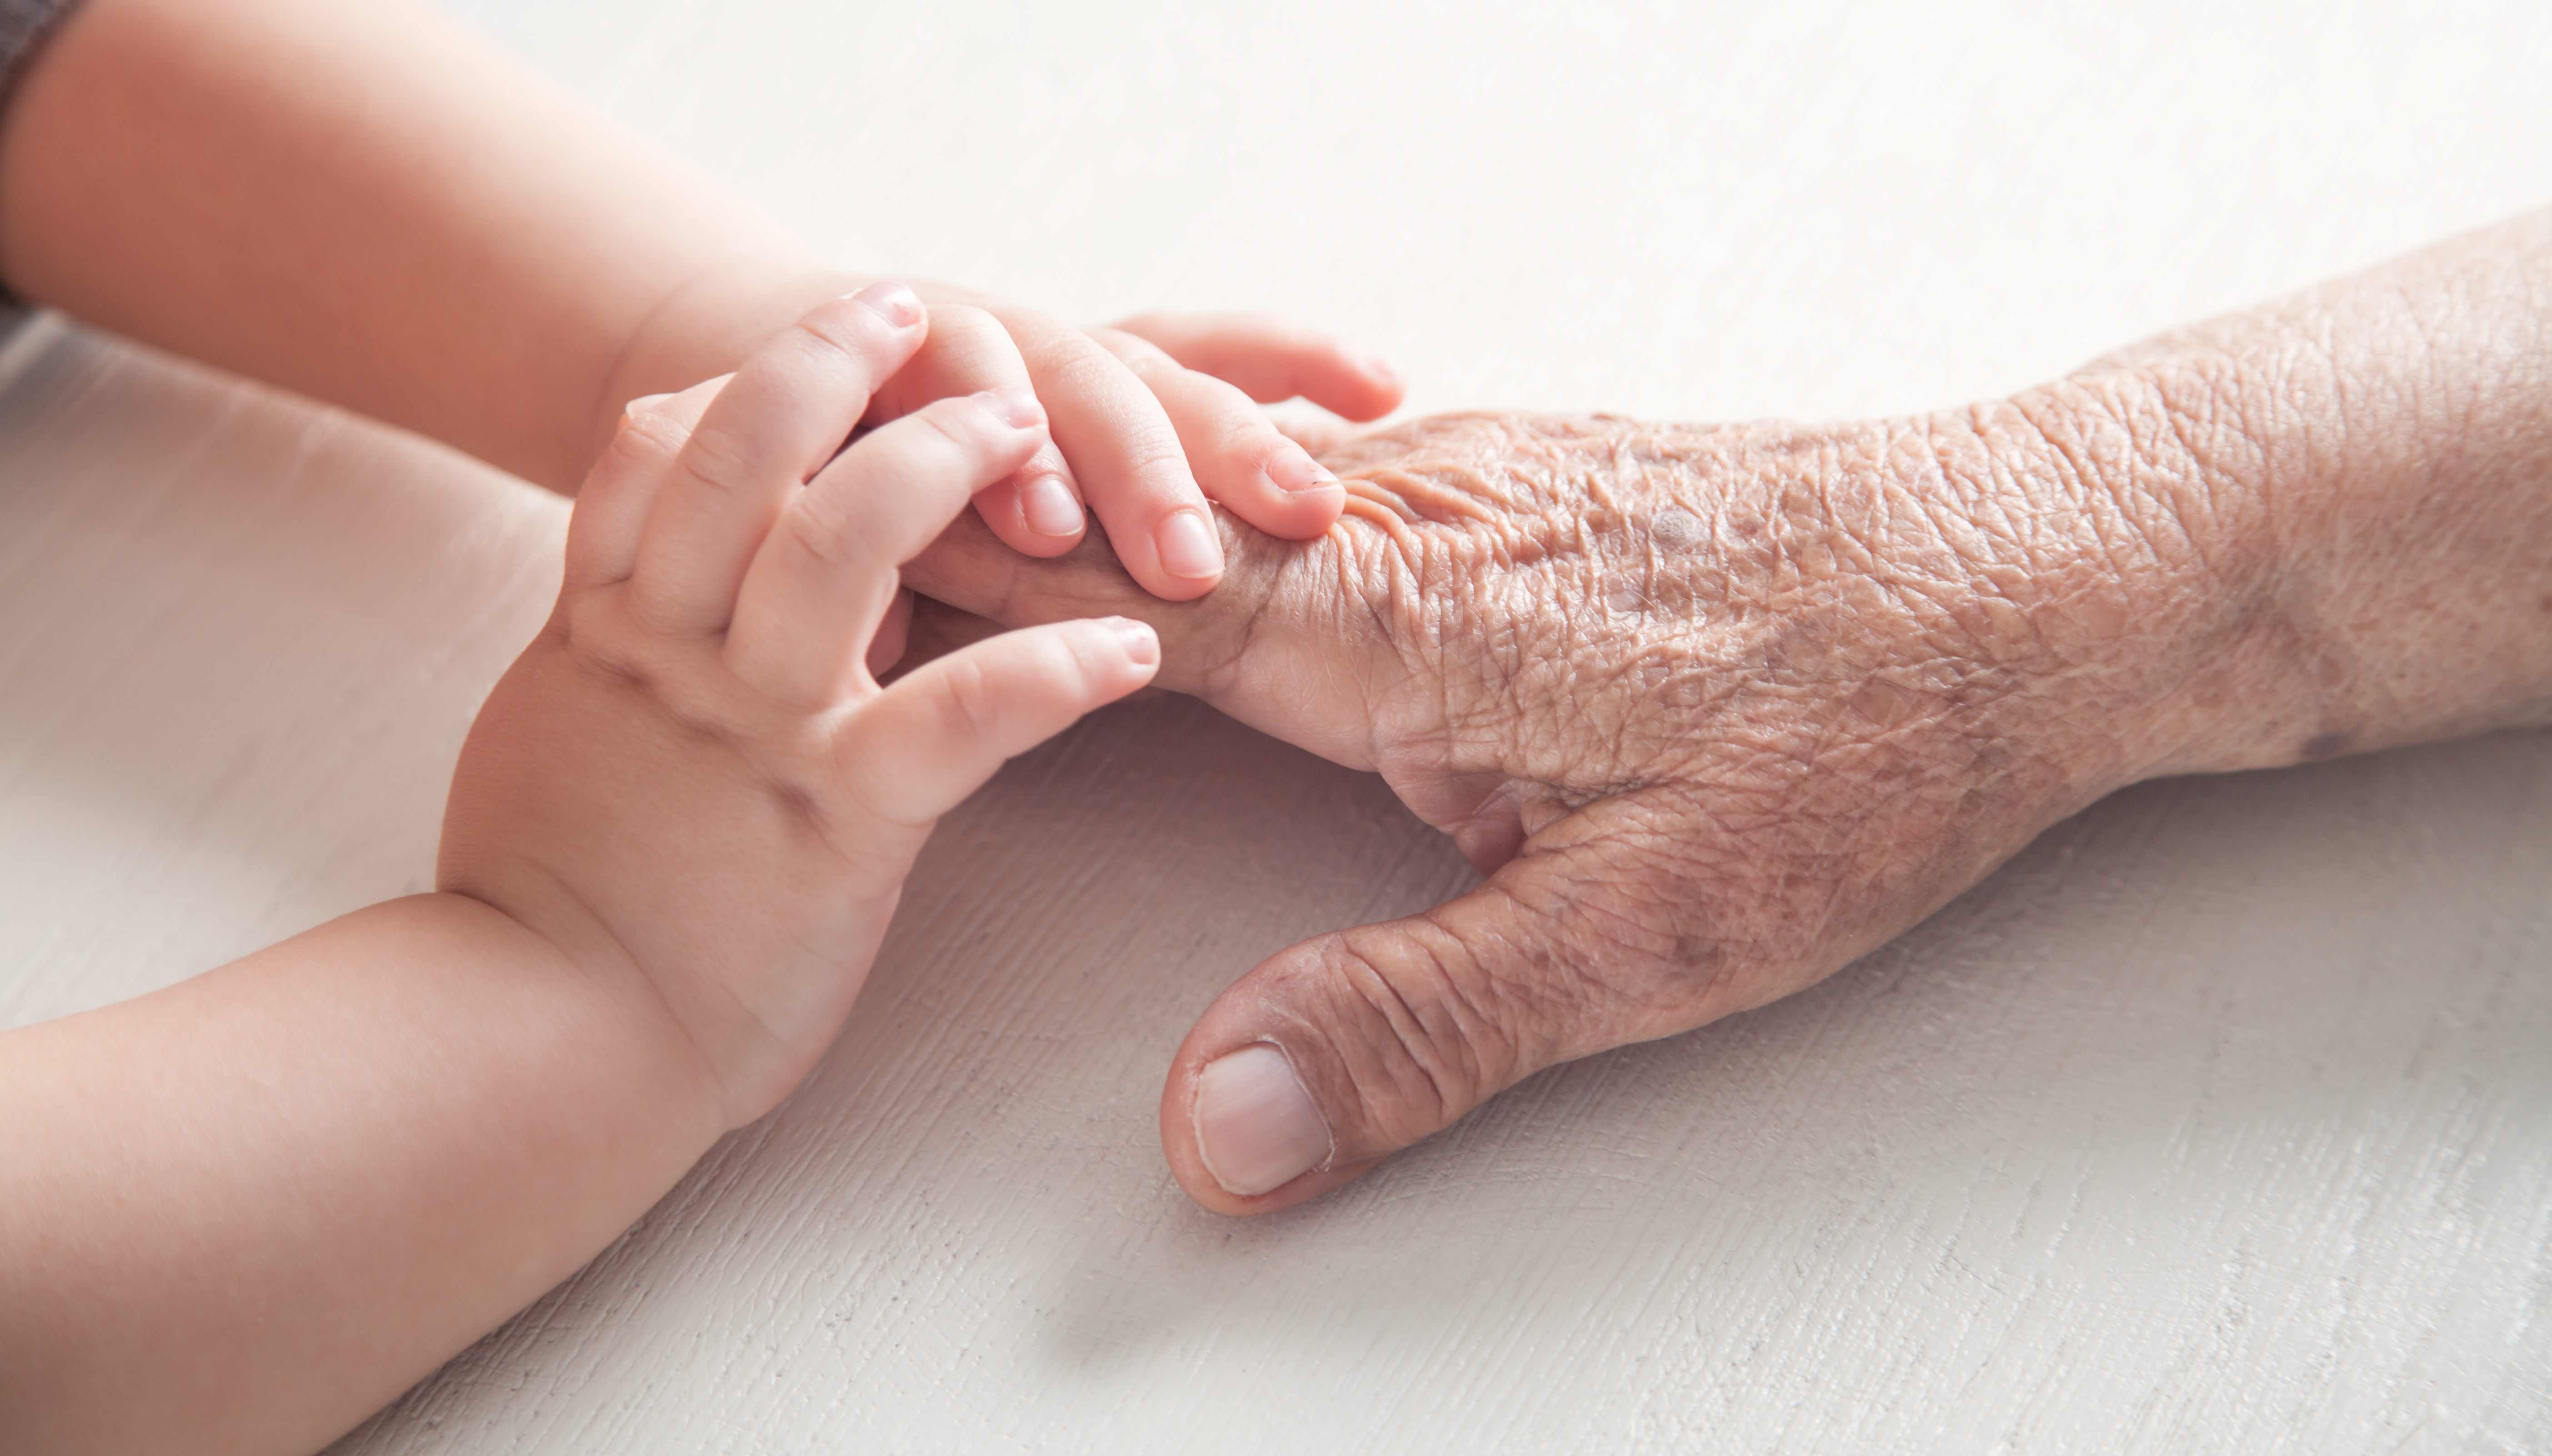 An child's hands holding an older person's hand. | Source: Shutterstock/ANDRANIK HAKOBYAN